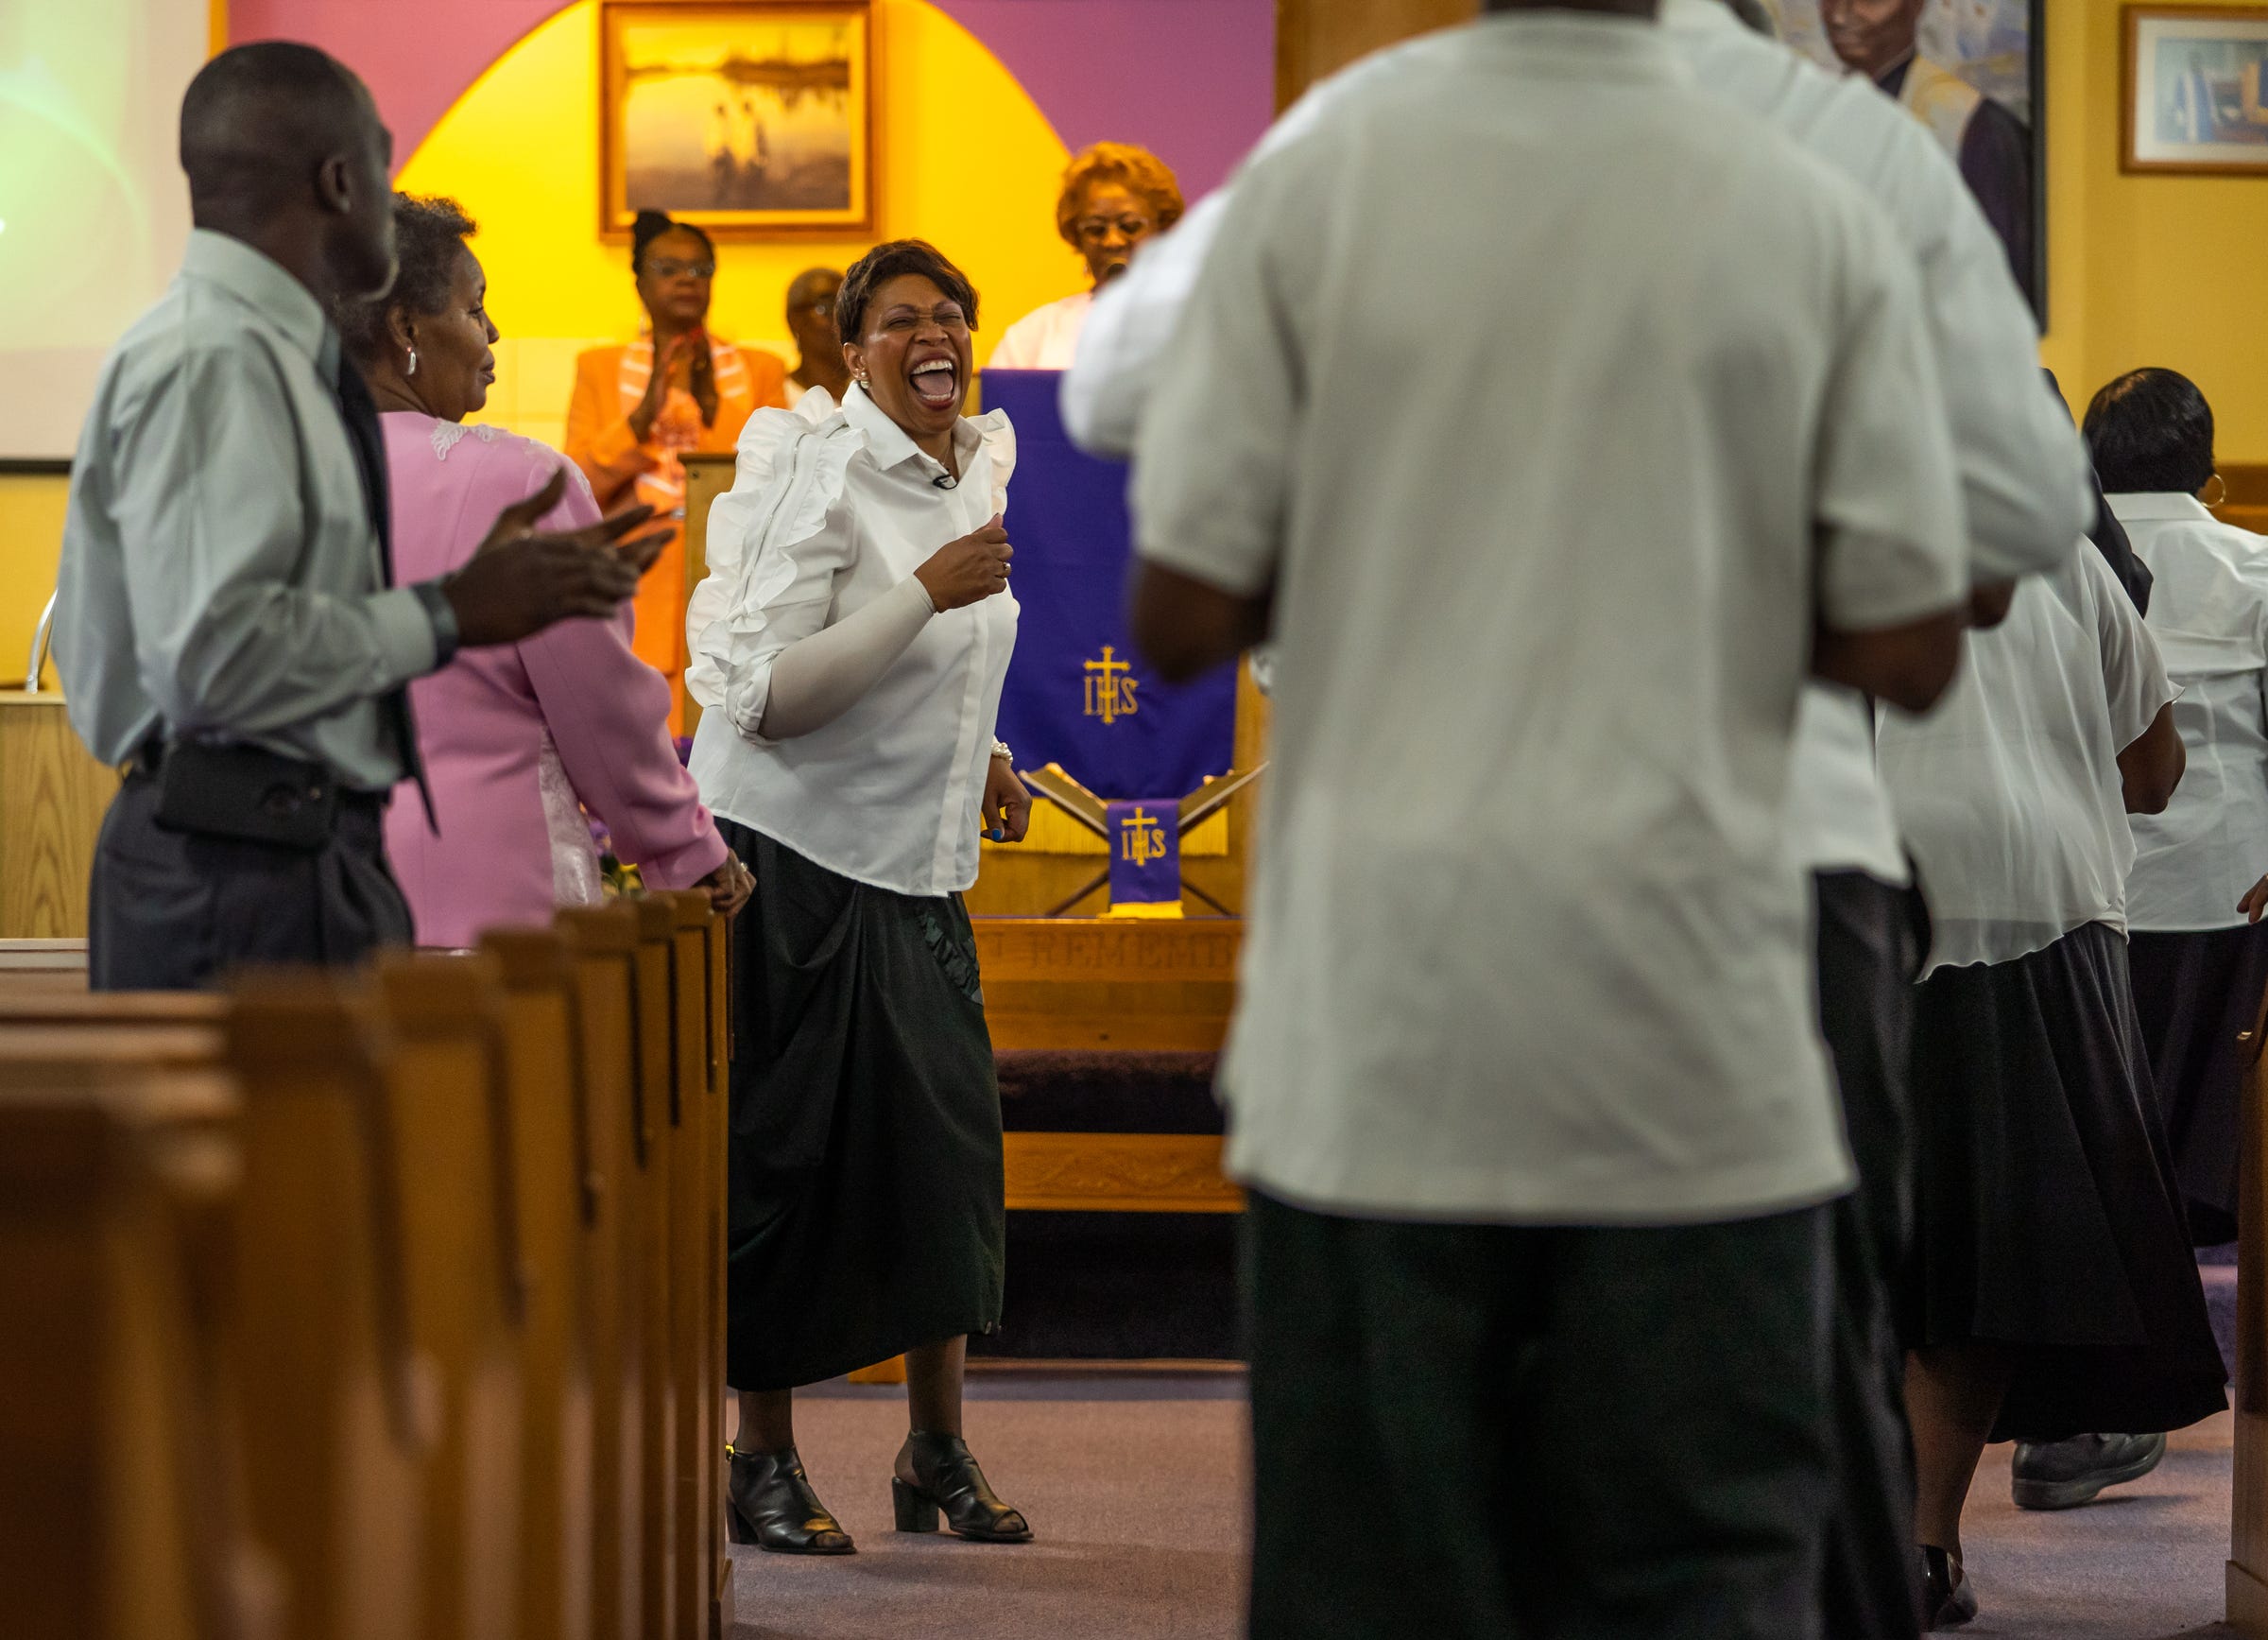 Carolynn Lofton of Belleville leads the choir during services at Christian Tabernacle Baptist Church in Ypsilanti on Sunday, July 14, 2019.